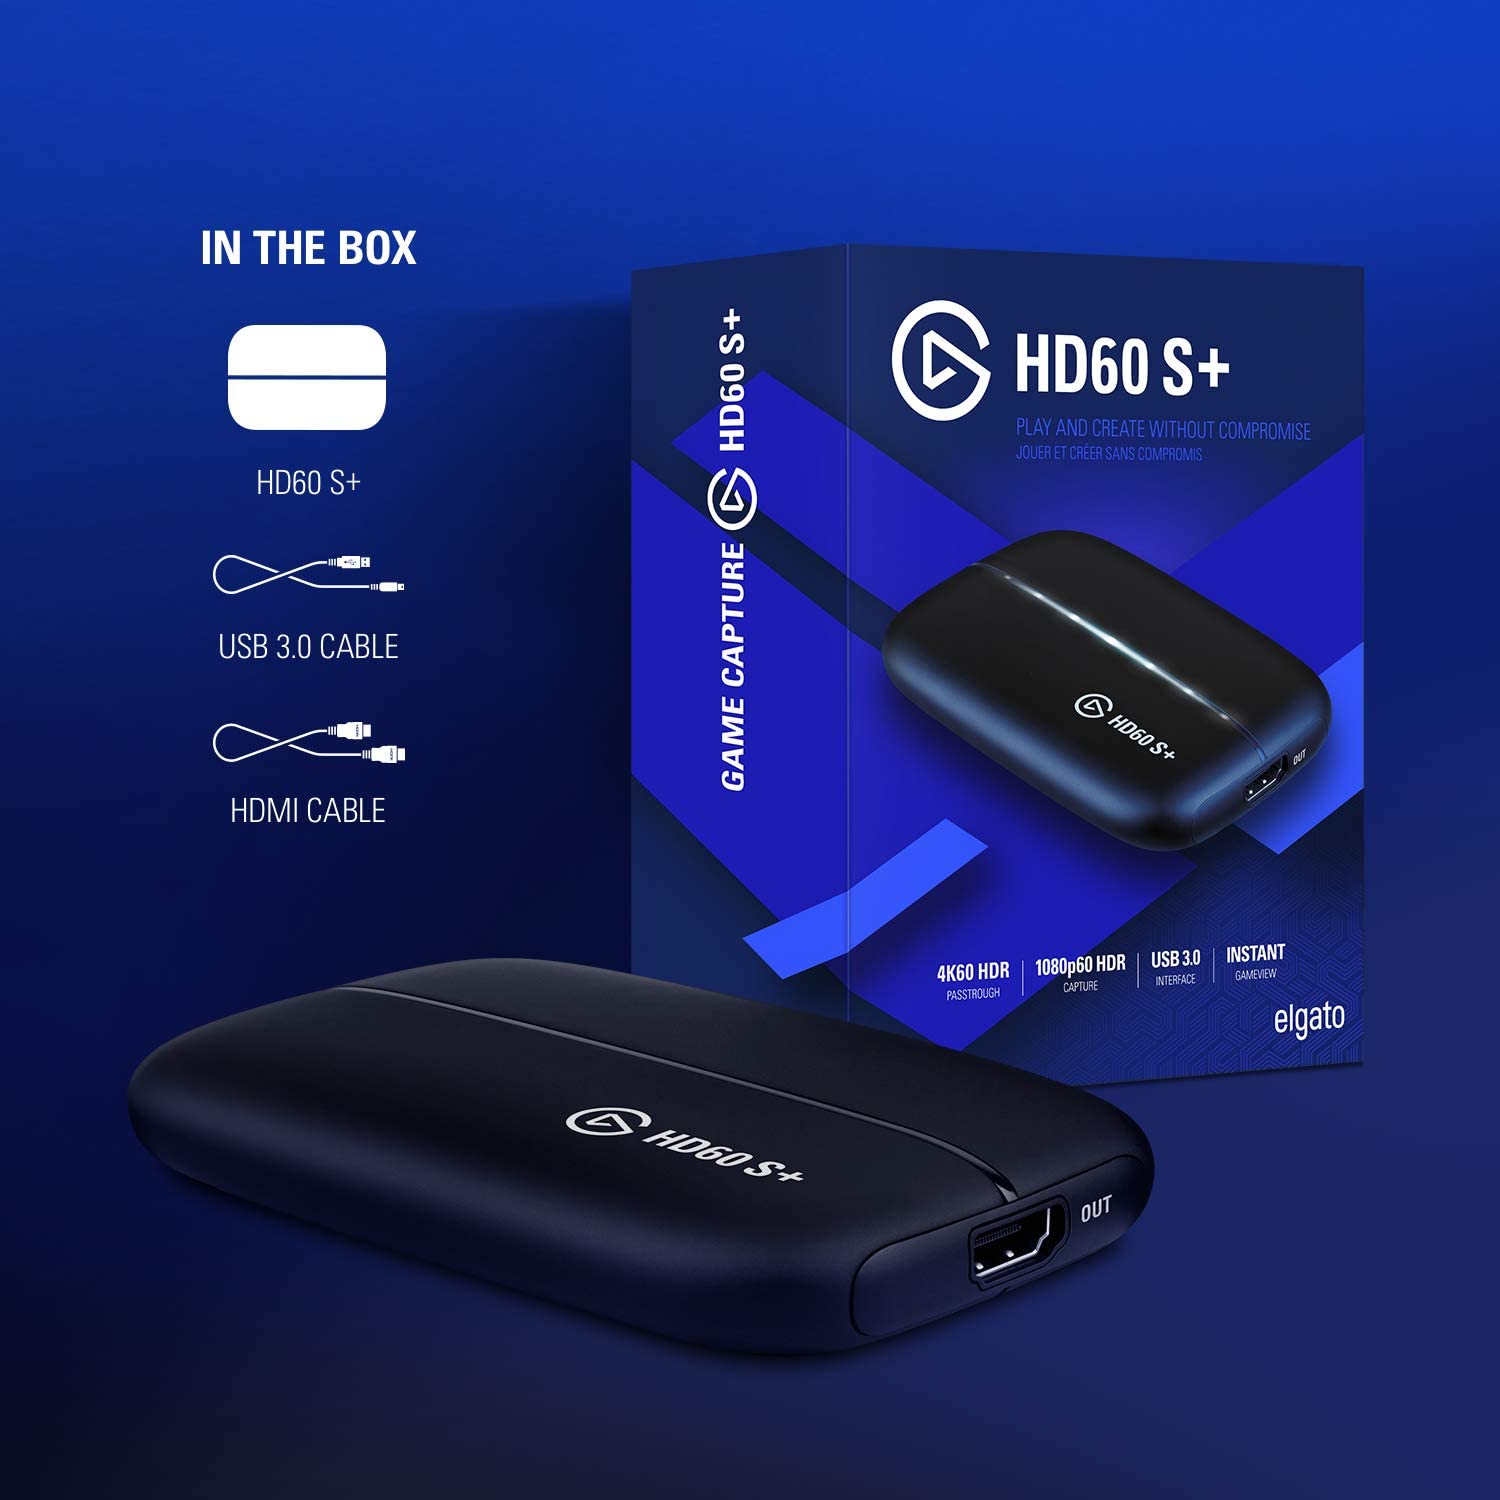 Elgato Game Capture HD60 S+ 1080p60 HDR10 Capture with 4K60 HDR10 Zero